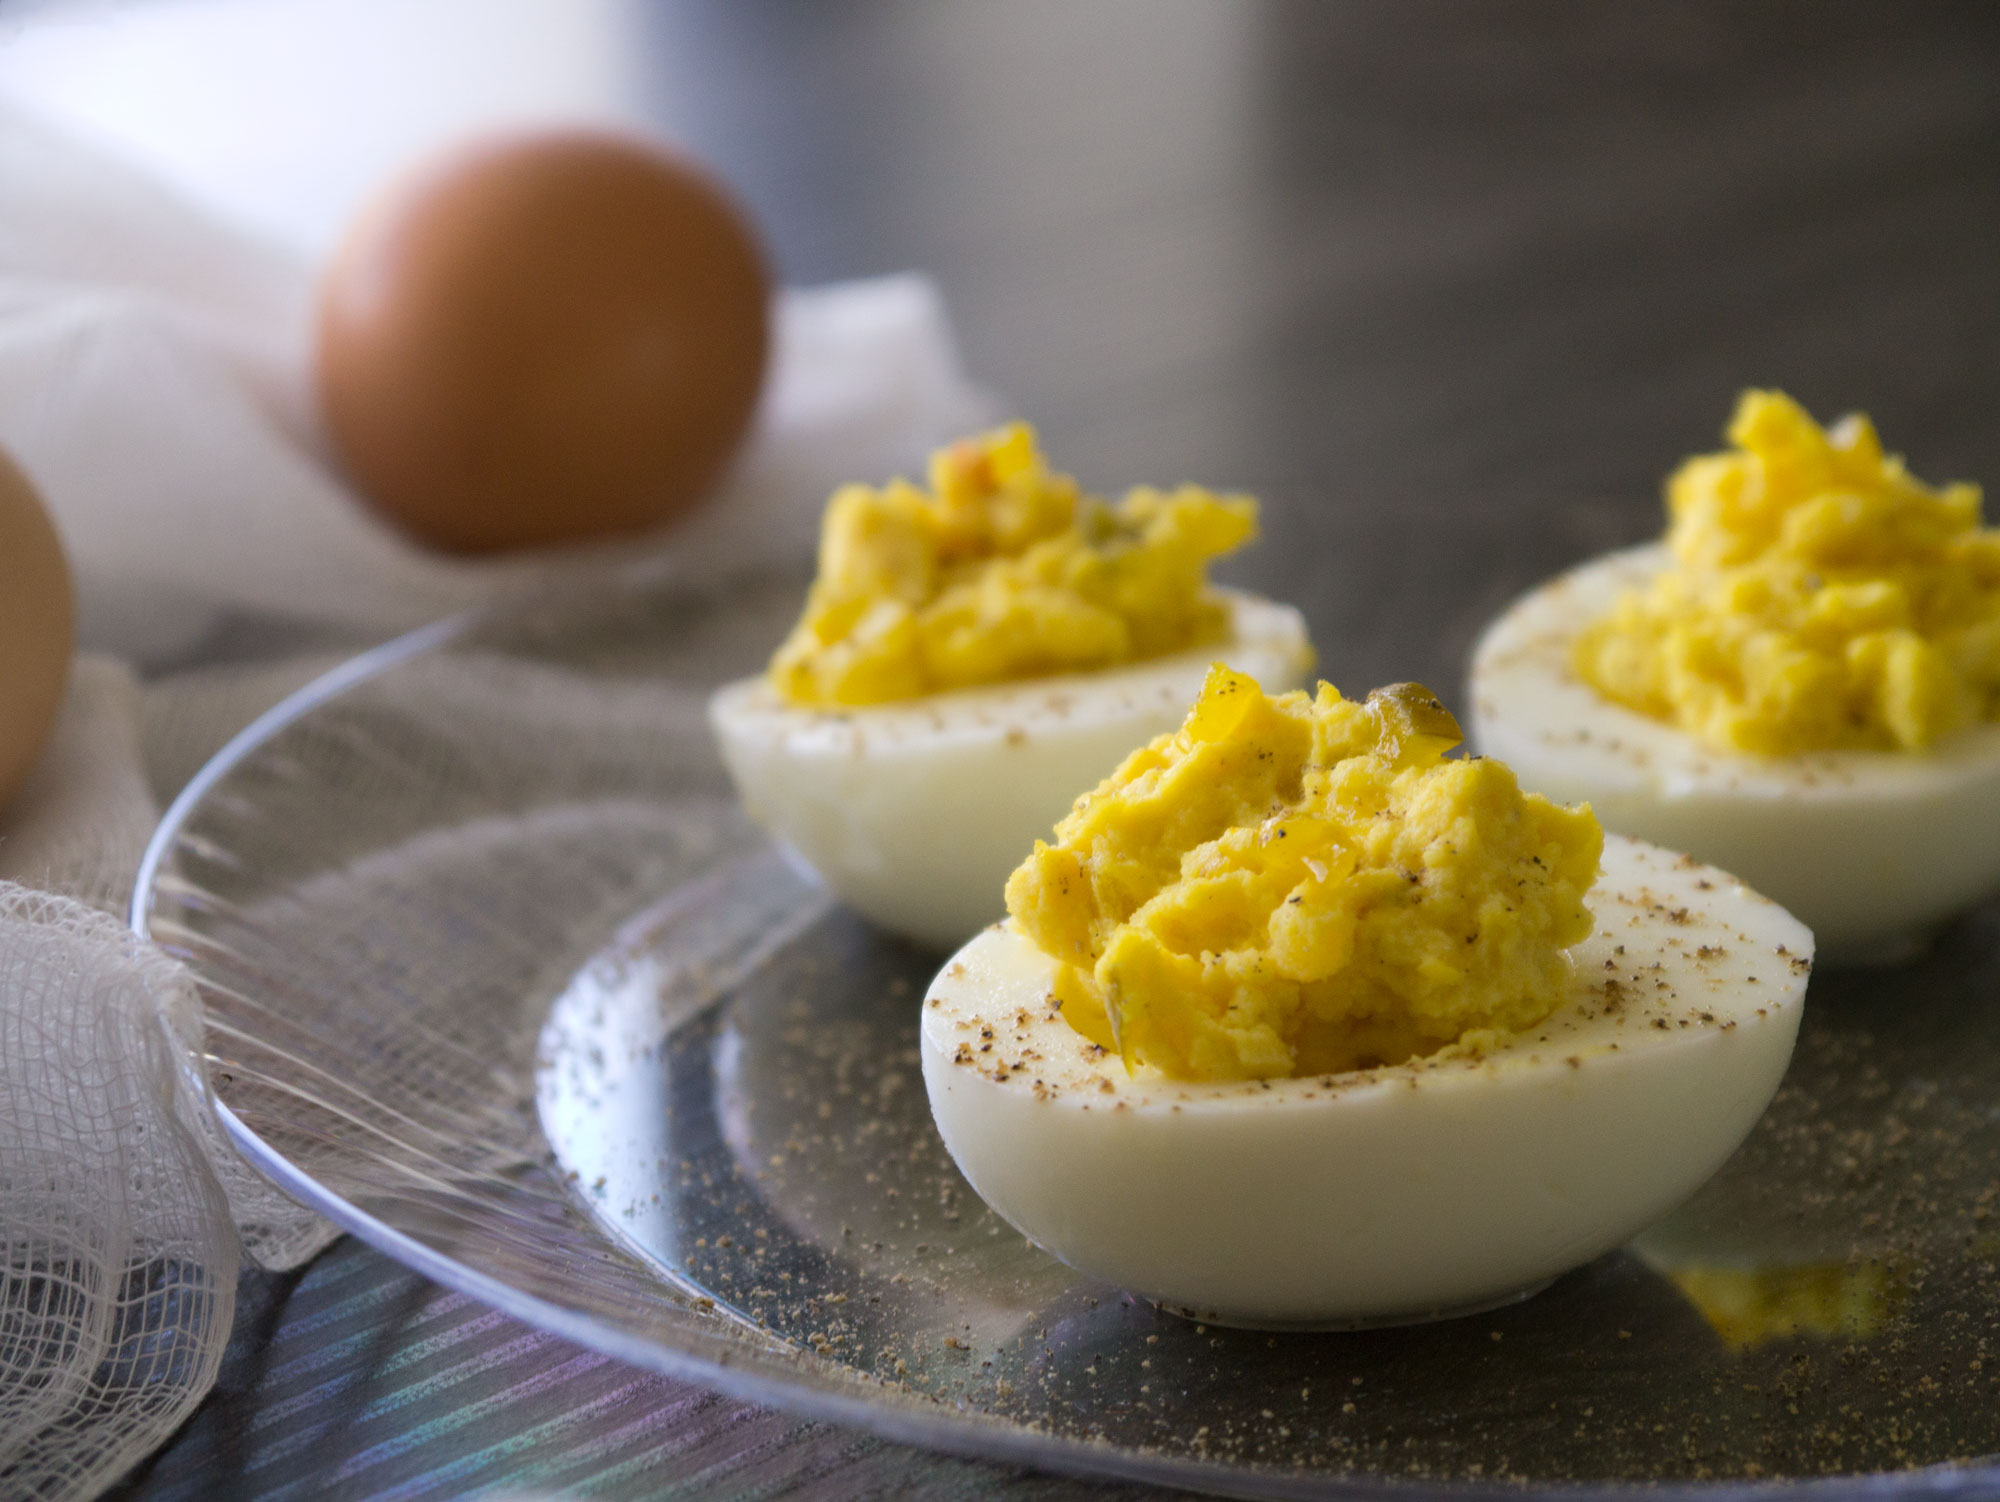 Enjoy deviled eggs this National - Hotpoint Appliances